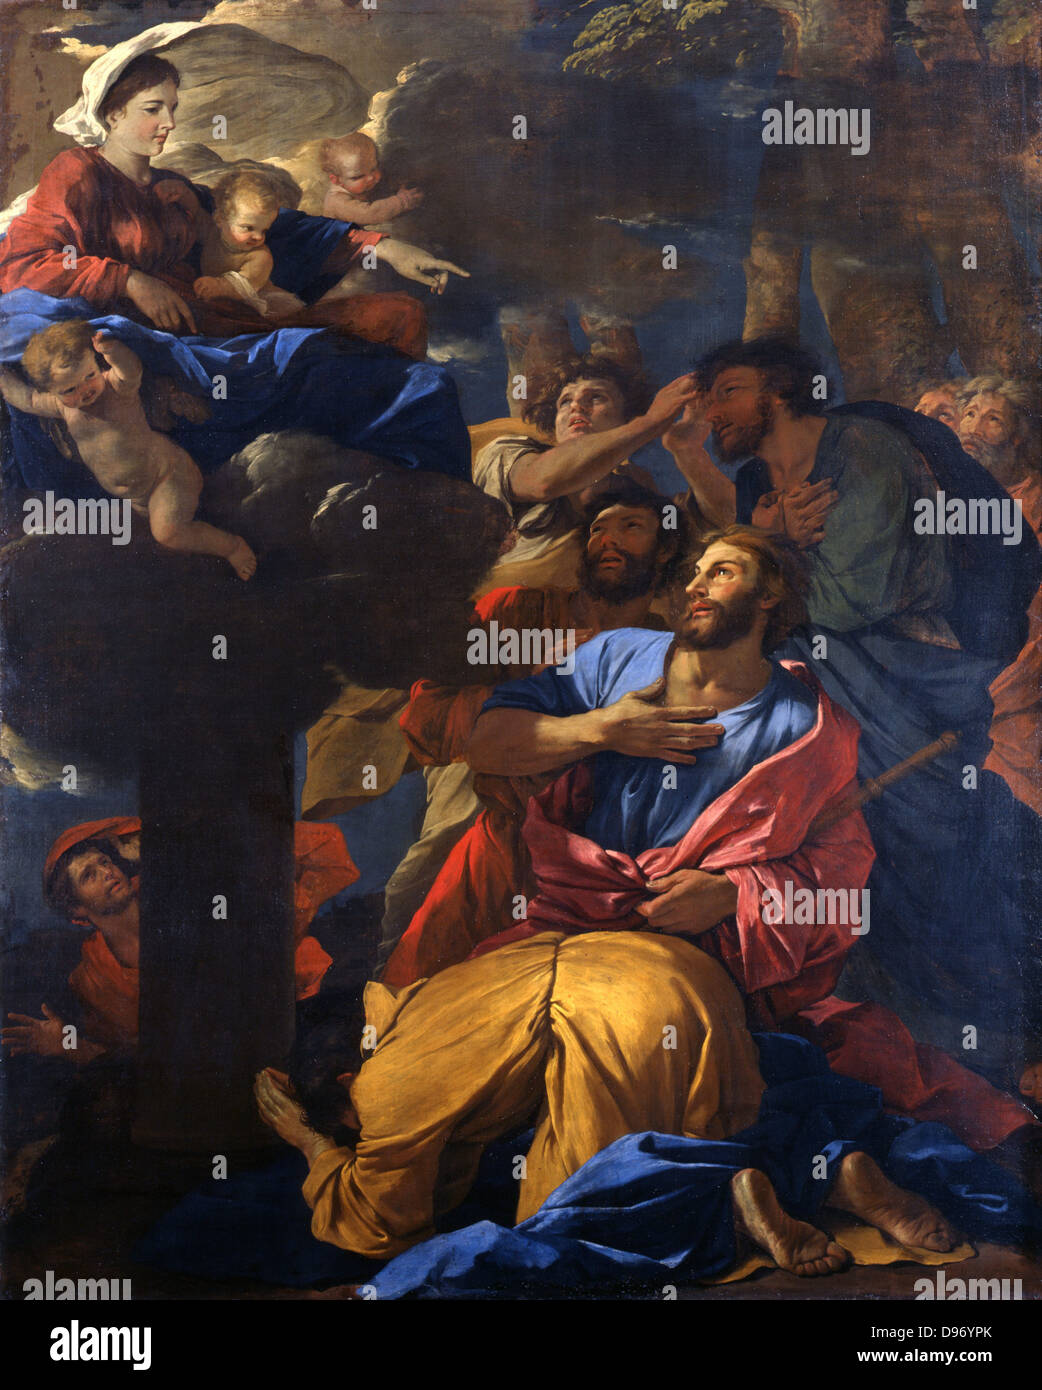 The Virgin Appearing to St James the Great' , c1690-1630. Nicolas Poussin (1594-1665) French Baroque painter. Oil on canvas. Stock Photo